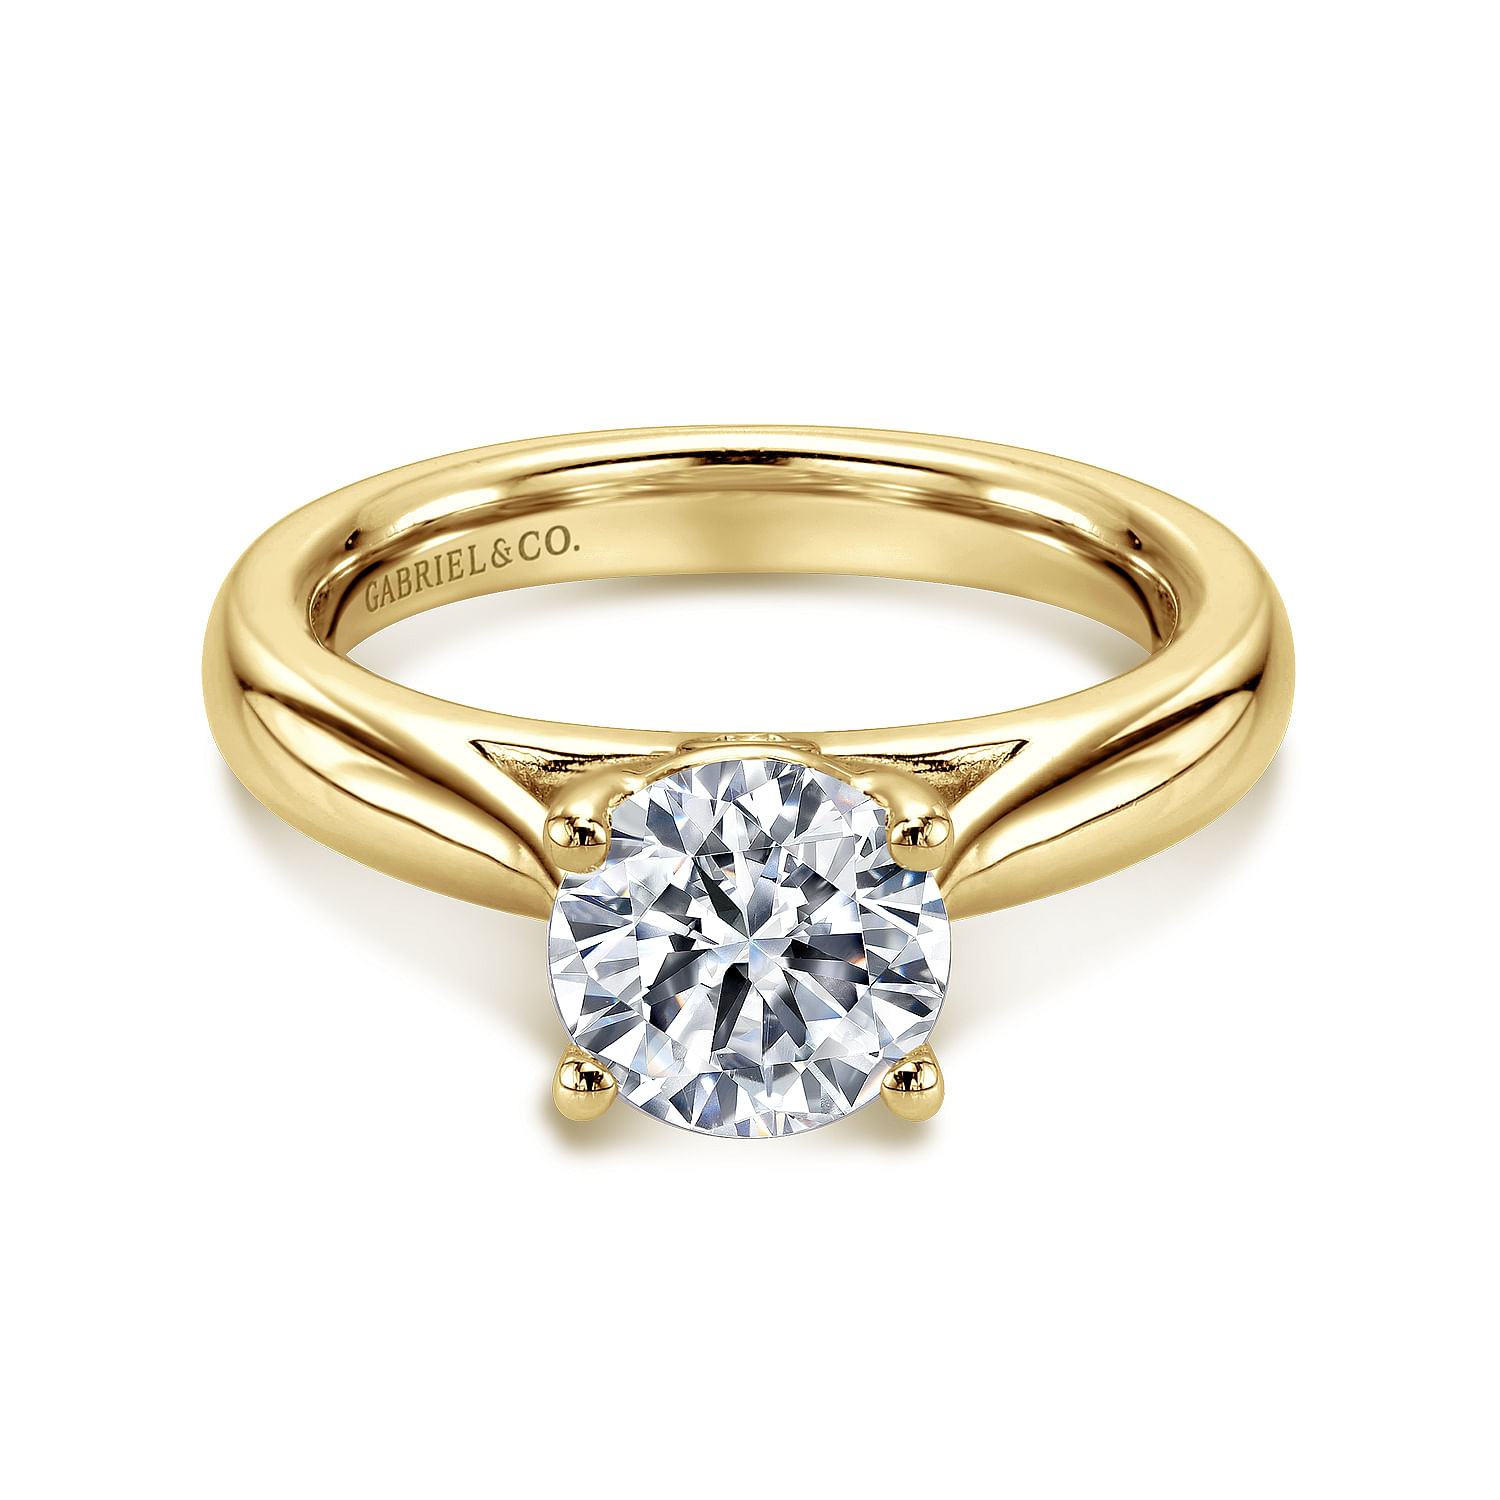 Polly - 14K Yellow Gold Round Diamond Engagement Ring